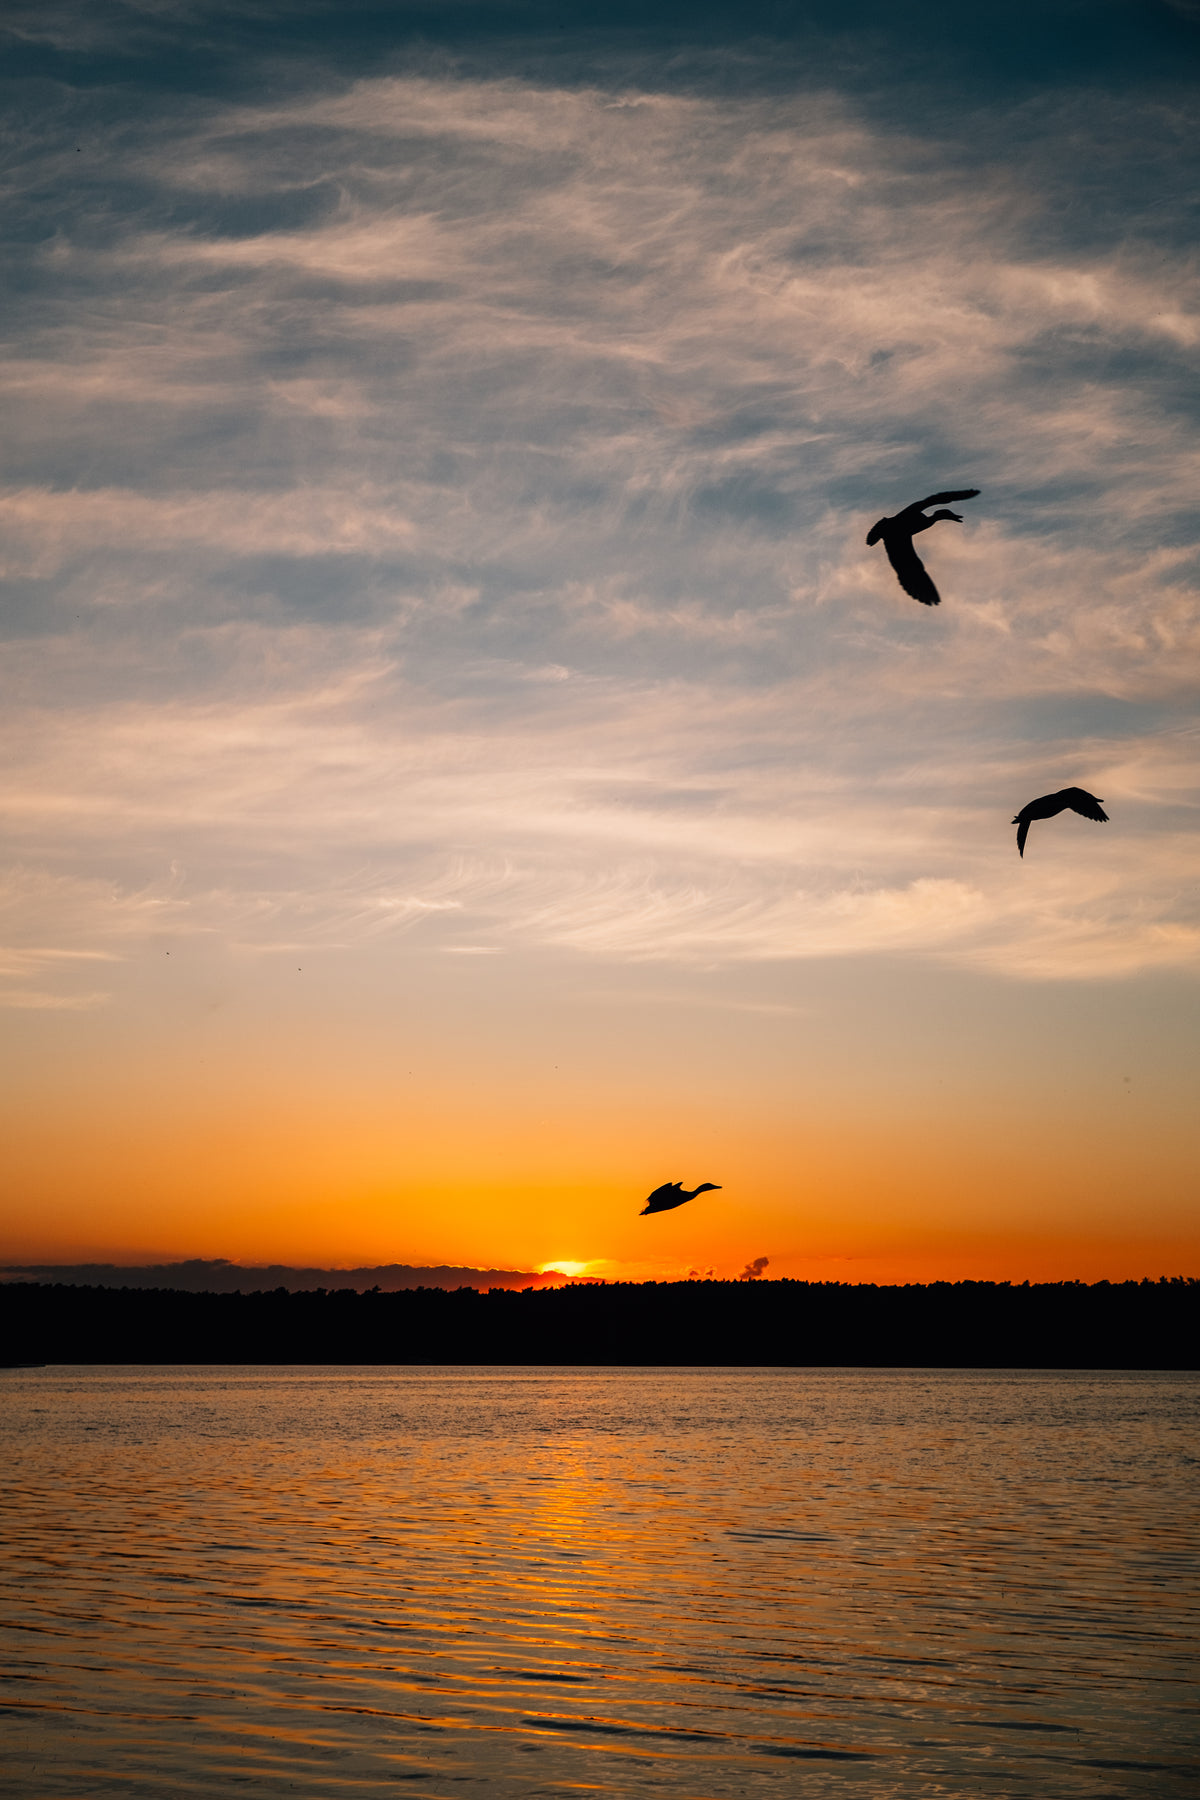 birds silhouetted by the setting sun